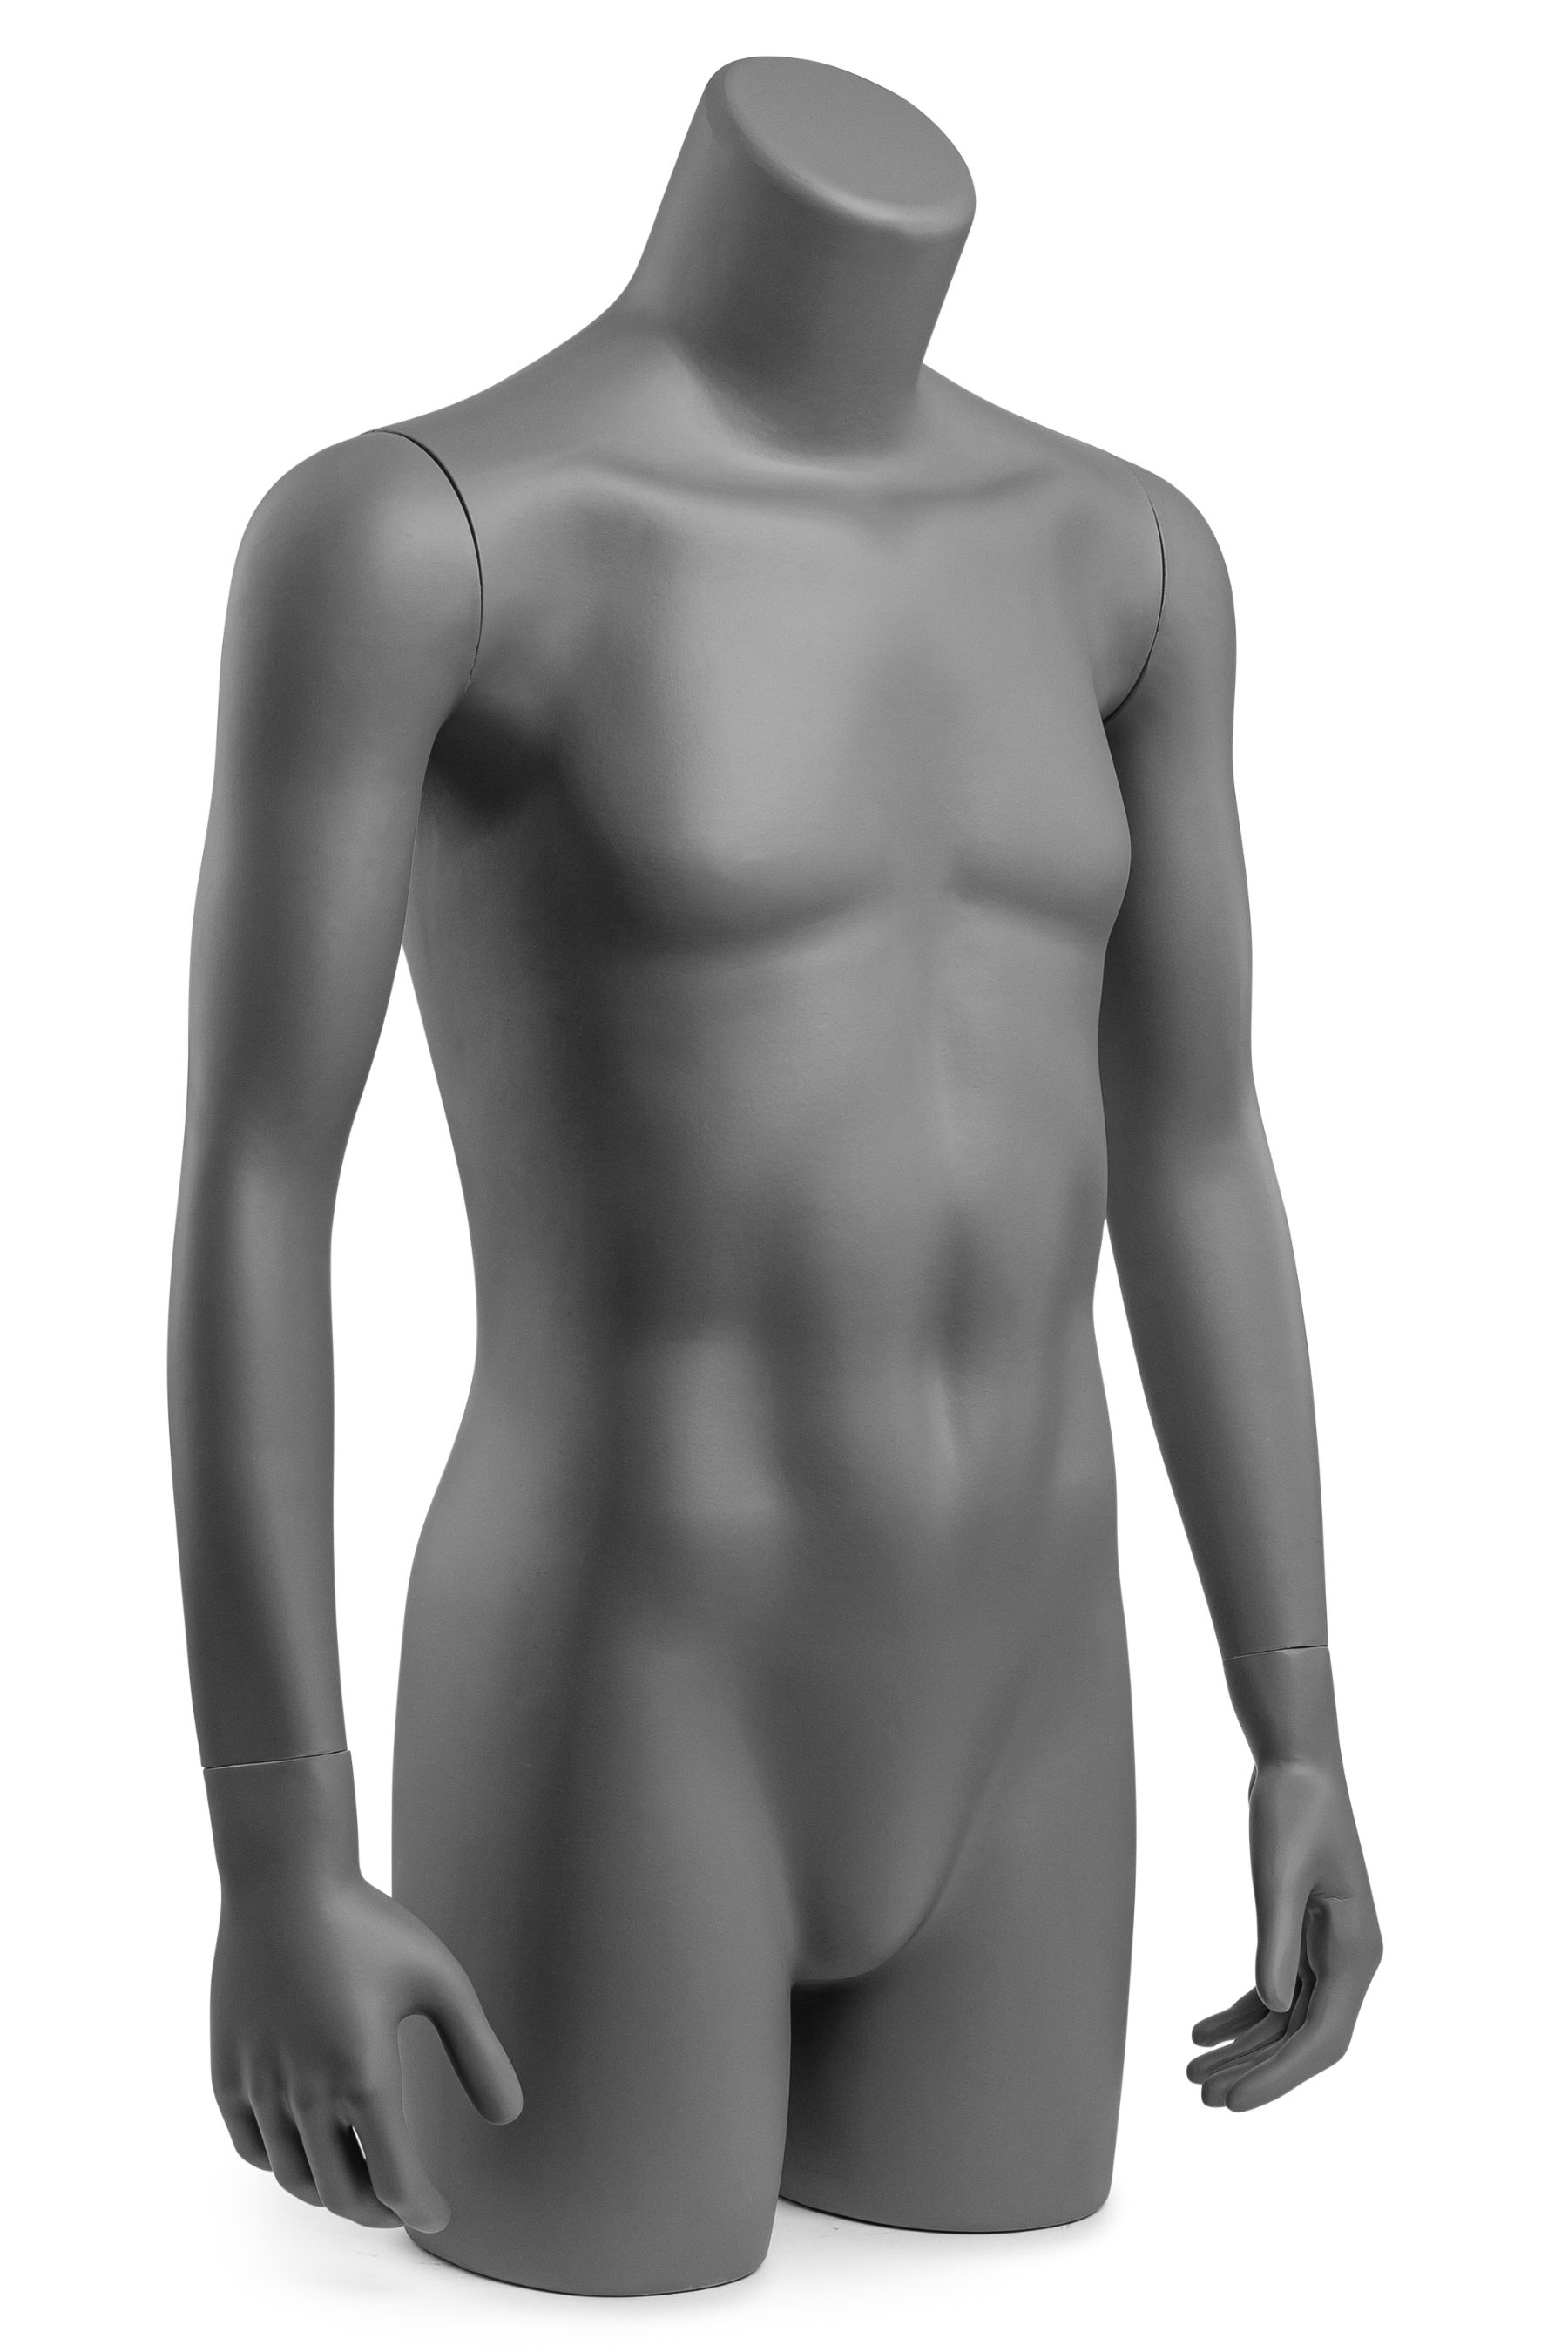 Male Fiberglass Torso With Removable neck and Arms #MD-TMW-IV 